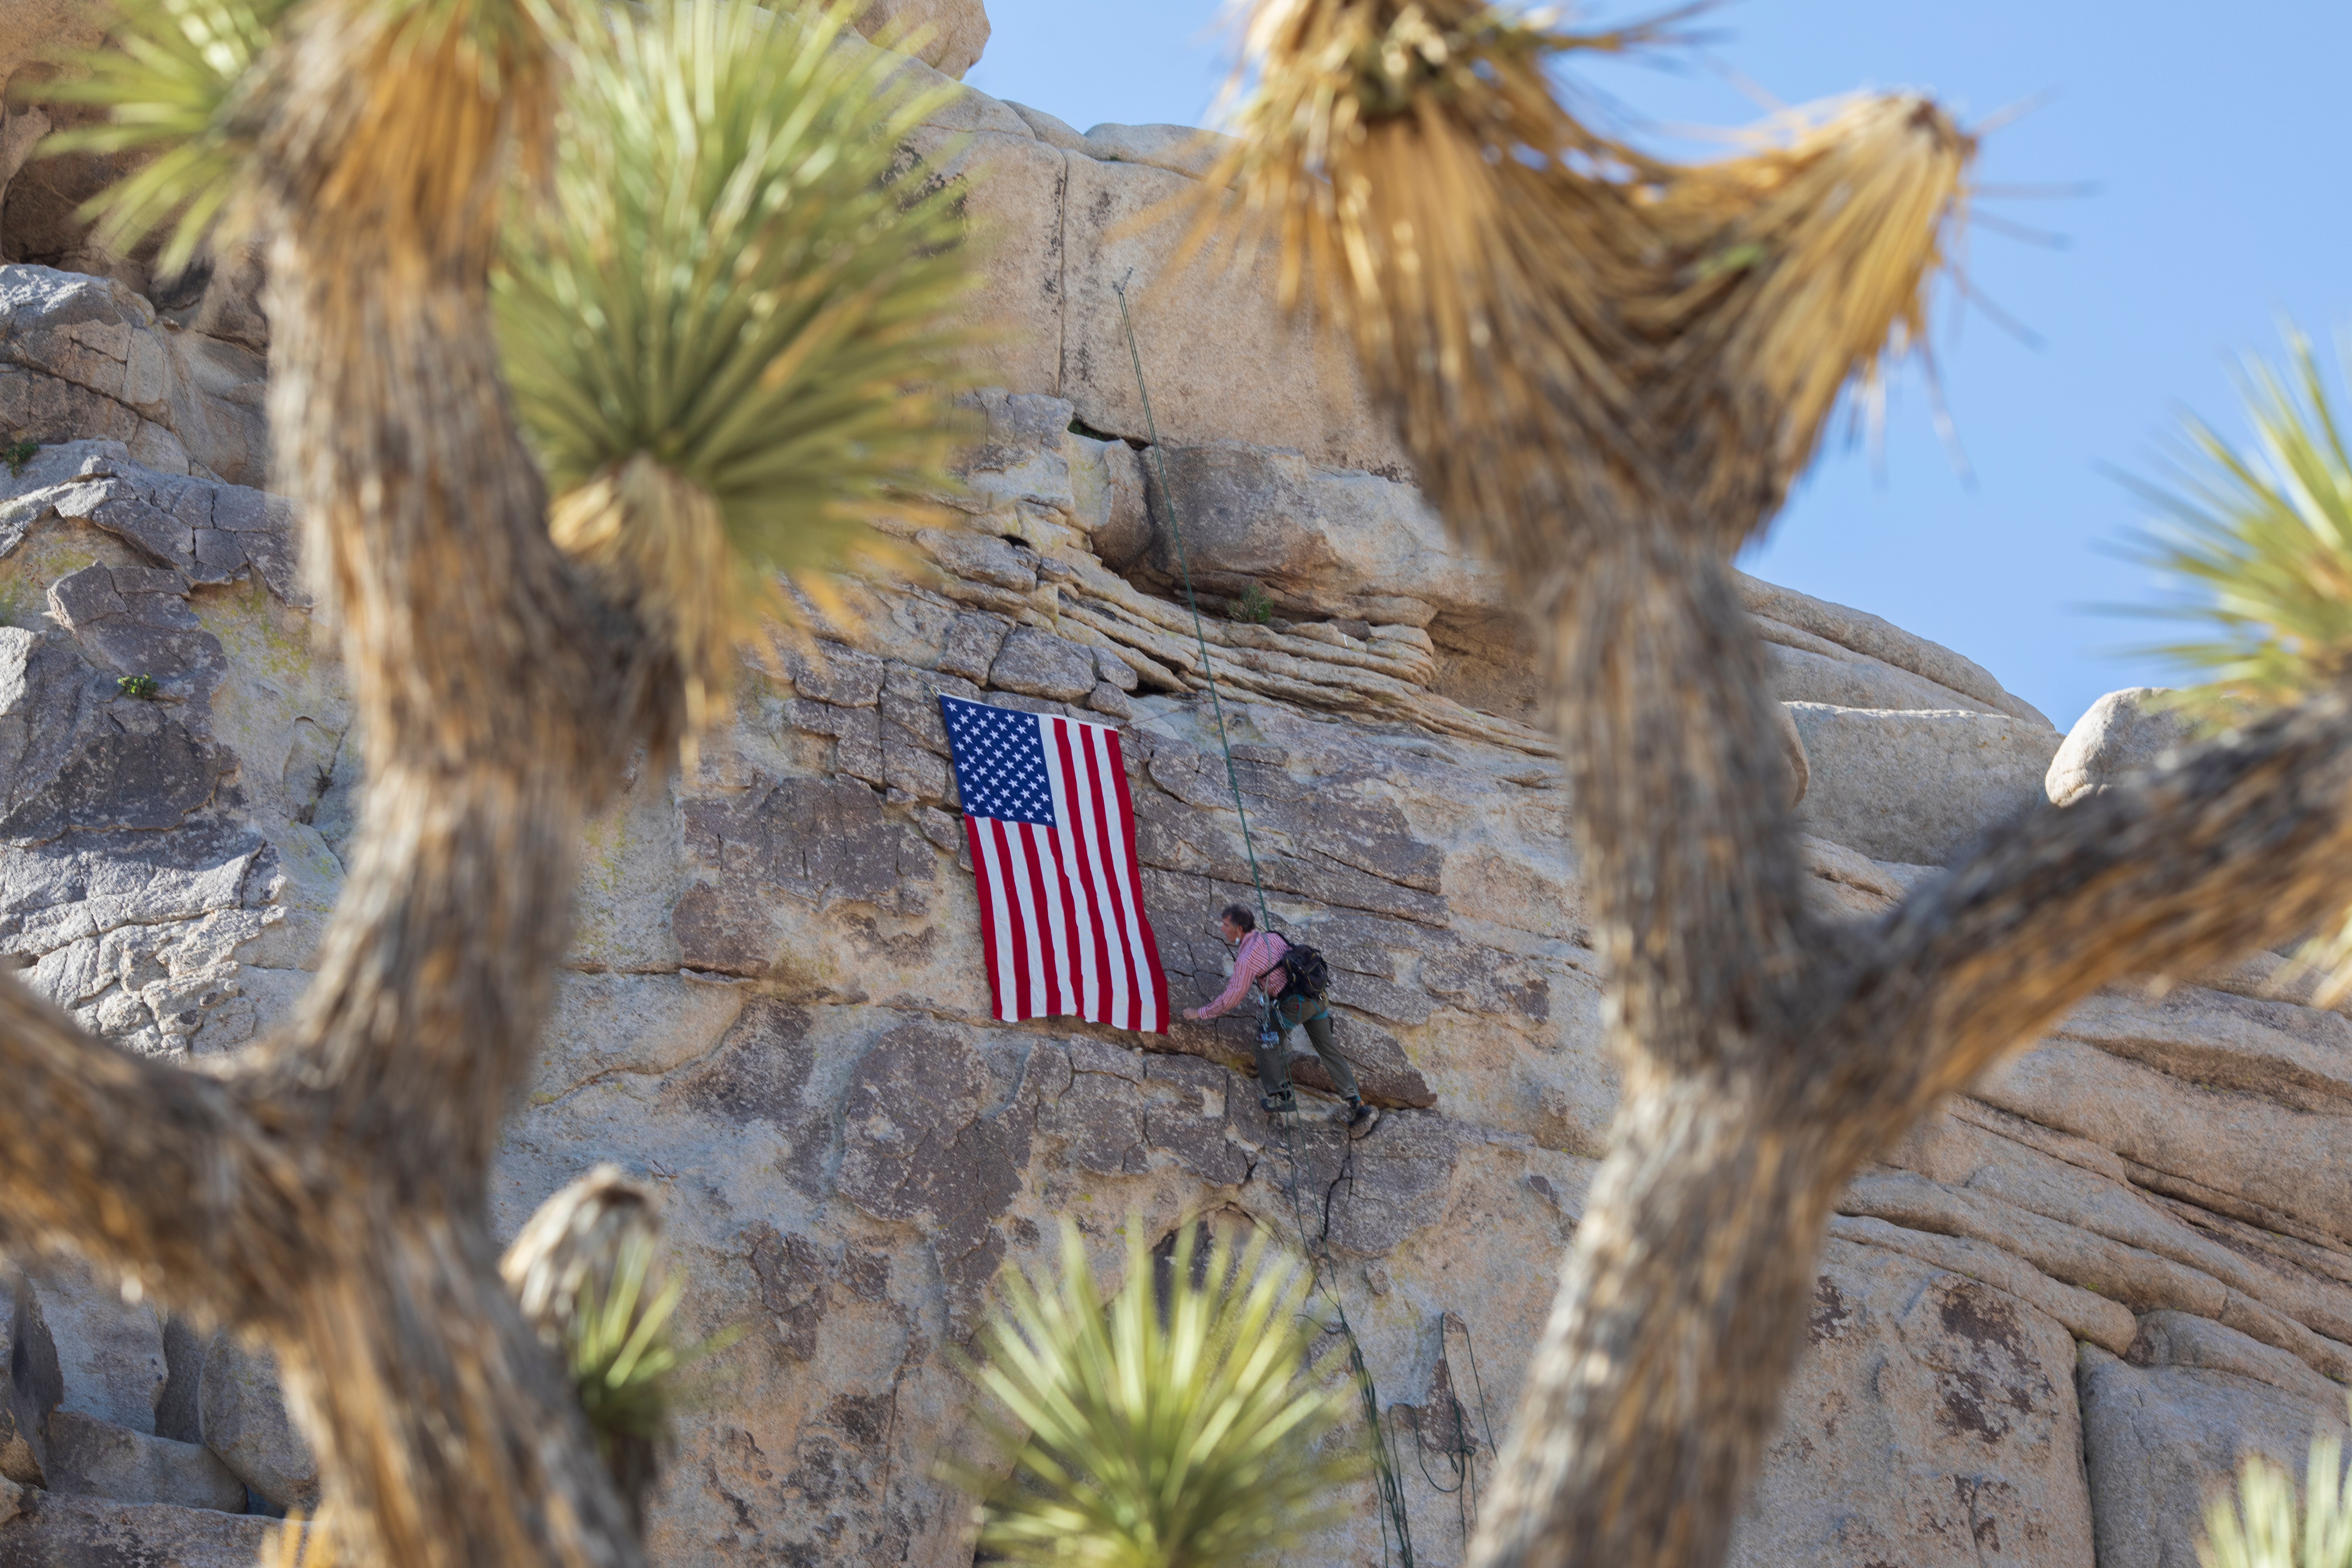 File photo: A climbing guide hangs an American flag from a crag at Joshua Tree National Park